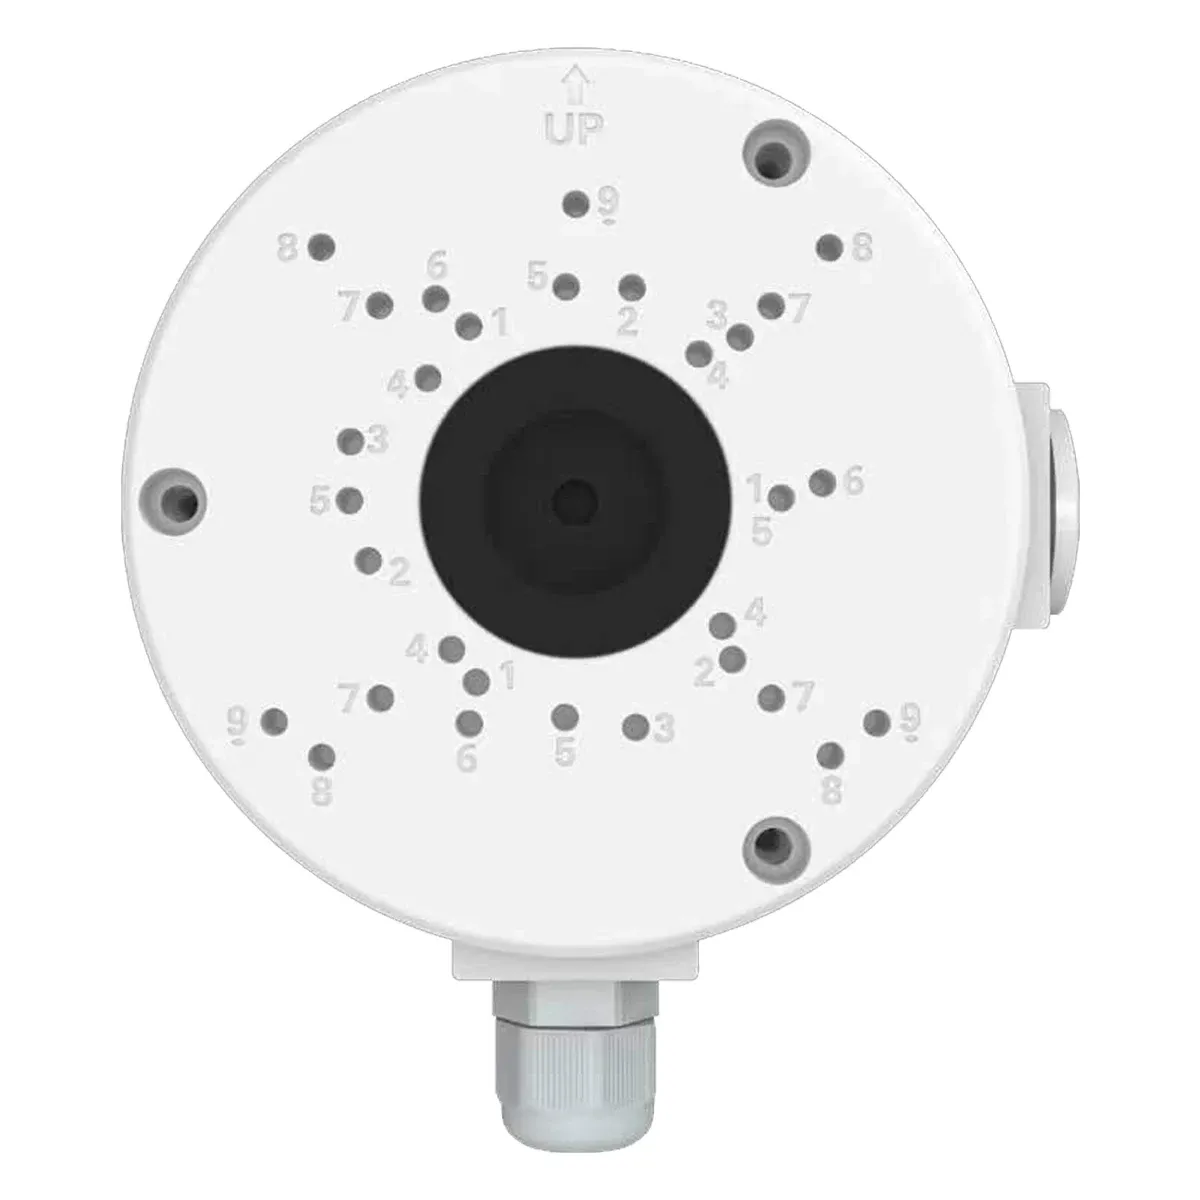 Cameras CCTV Camera Junction Box Waterproof Accessories Mount Base For All Kind Of Security Surveillance Installation